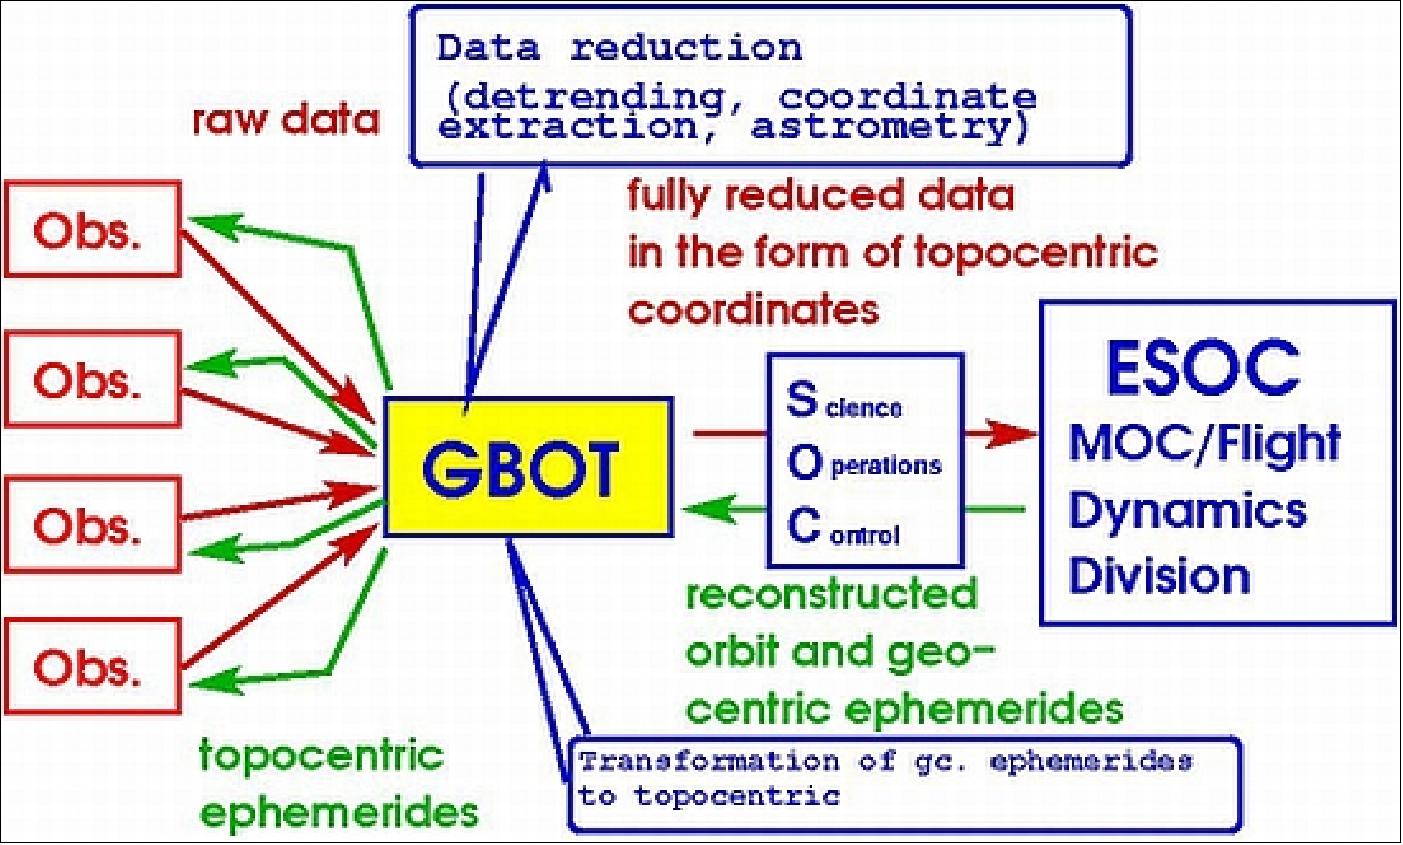 Figure 91: Schematic view of the GBOT elements and their interrelations (image credit: ESA)